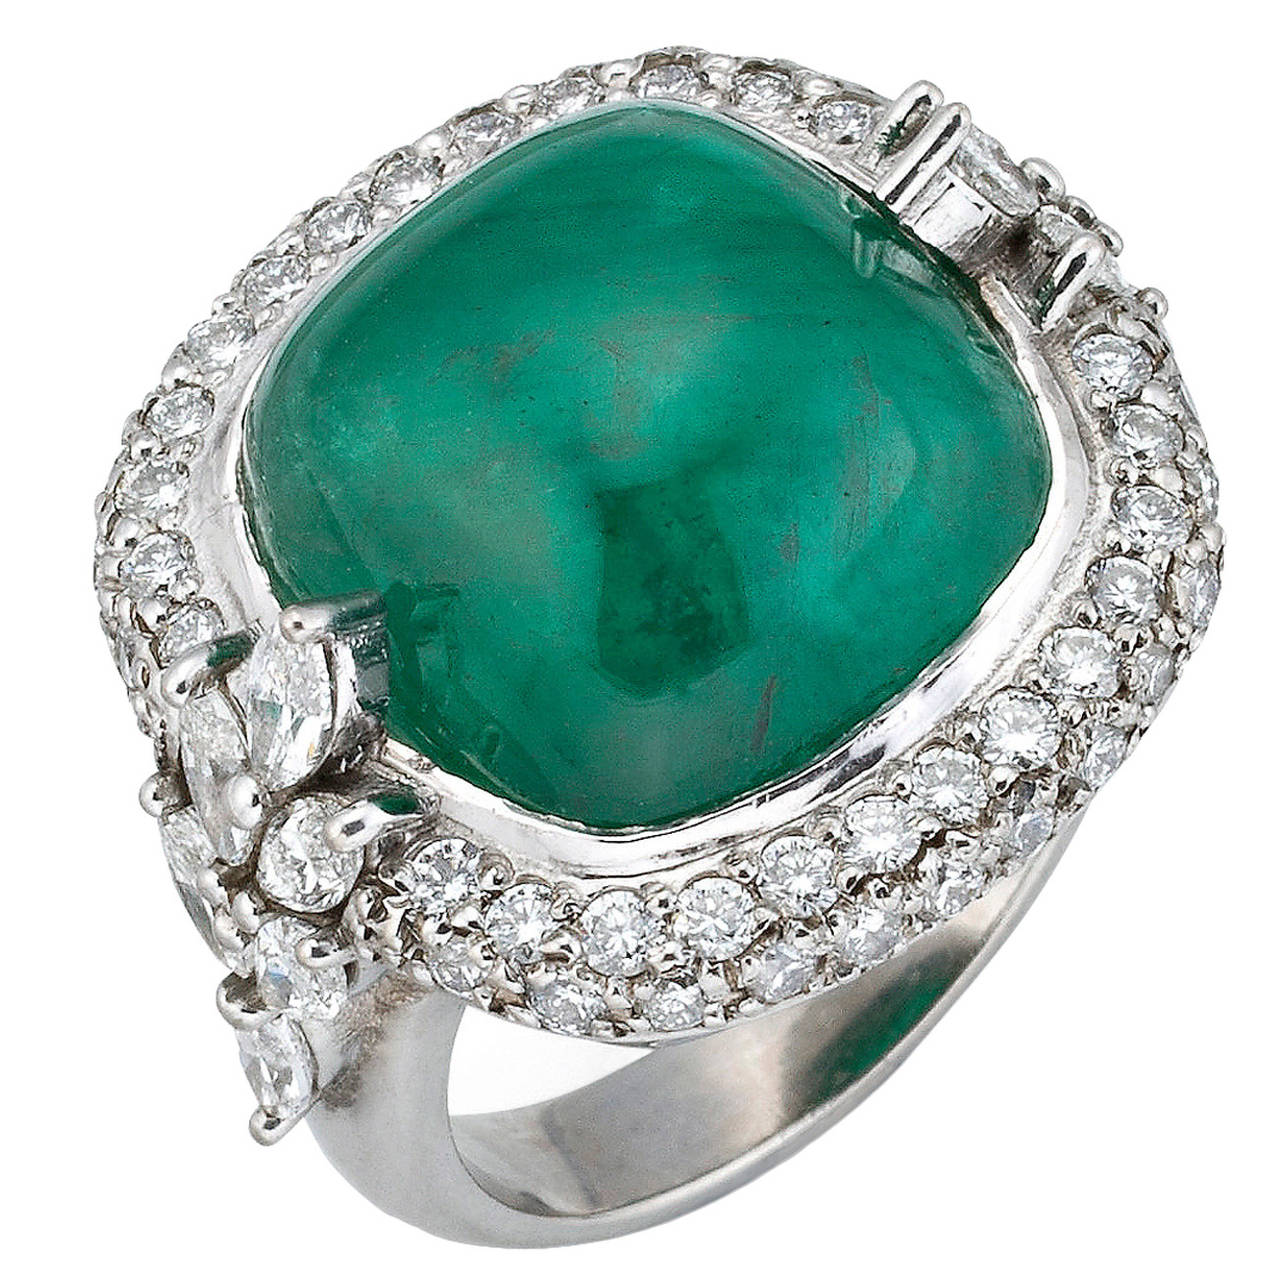 Sugarloaf Cabochon Cut Emerald Diamond Cocktail Ring For Sale at 1stdibs